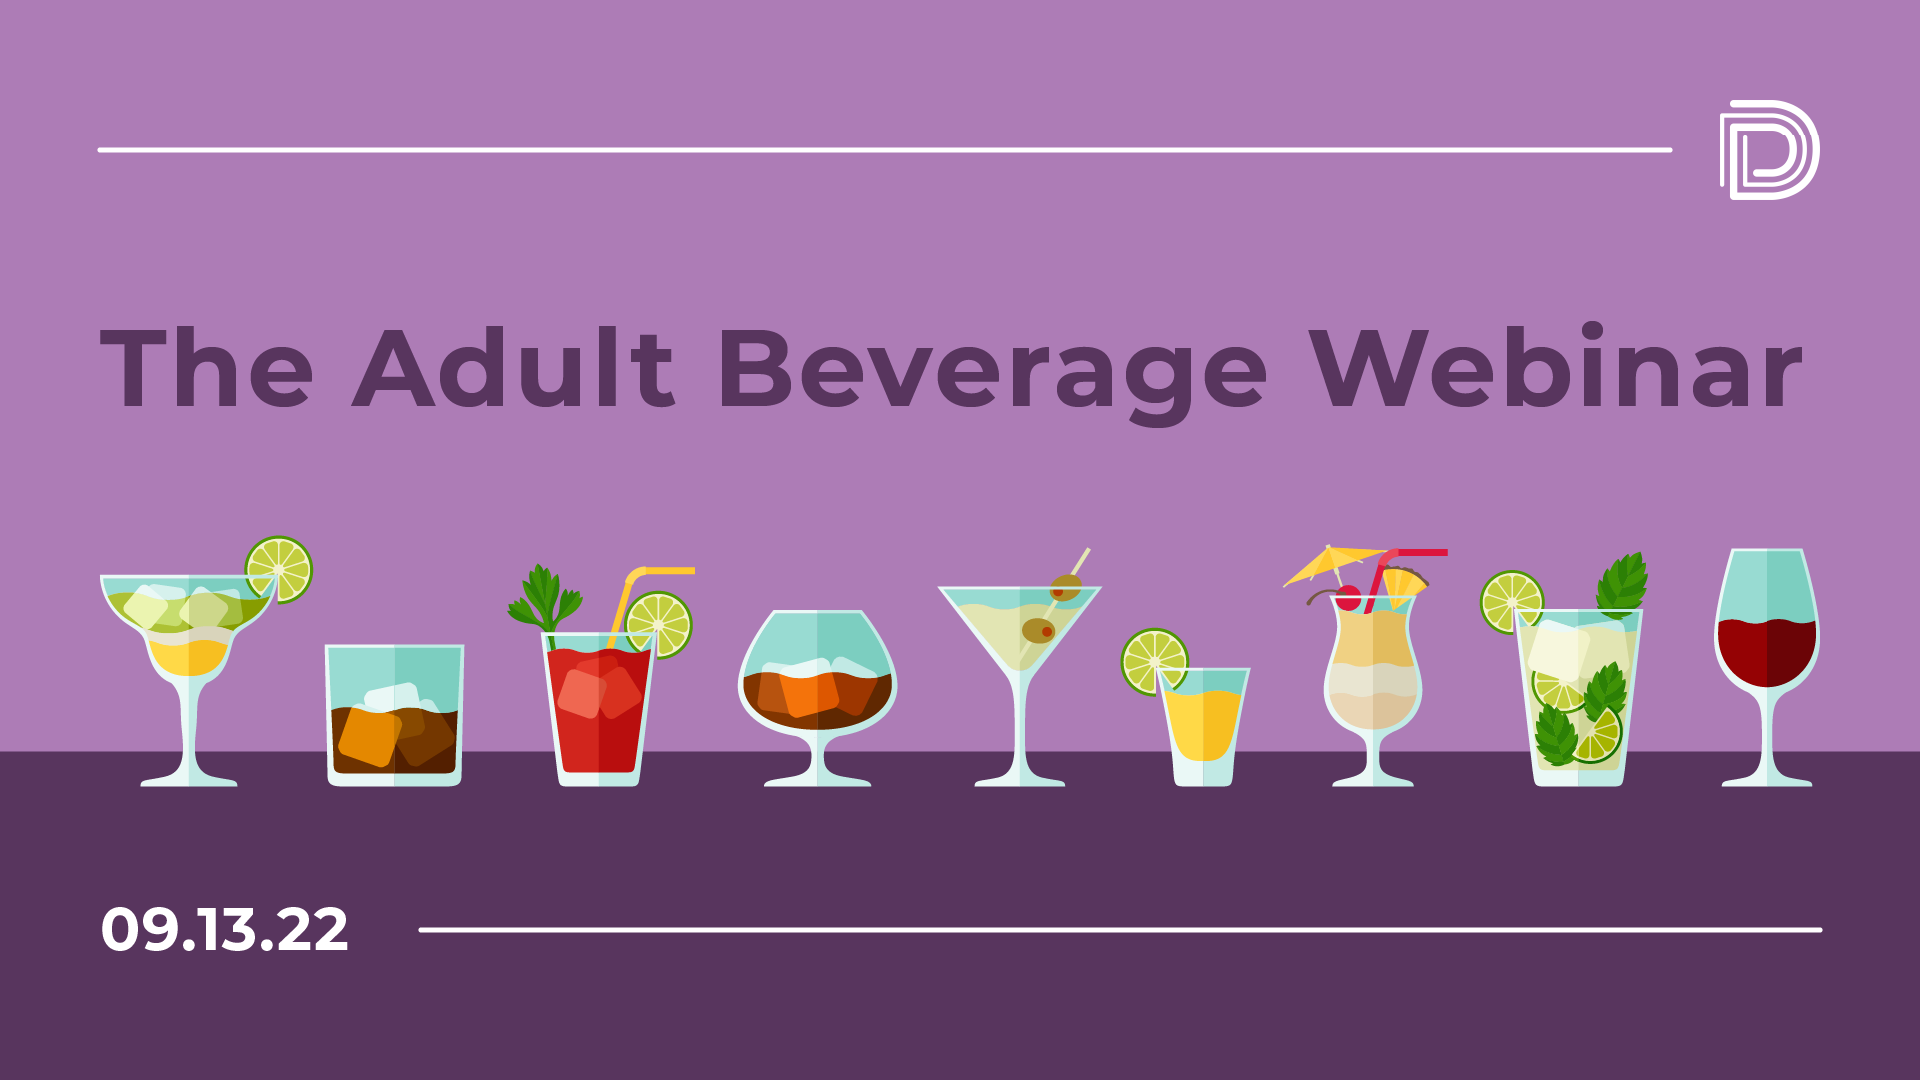 In this special adult beverage-focused webinar, Datassential hosts Colleen McClellan, Kyle Chamberlin, and Kelly Dykhuizen share the latest and greatest trends and research in the on- and off-premise category and provide a comprehensive overview of the consumer beverage landscape.